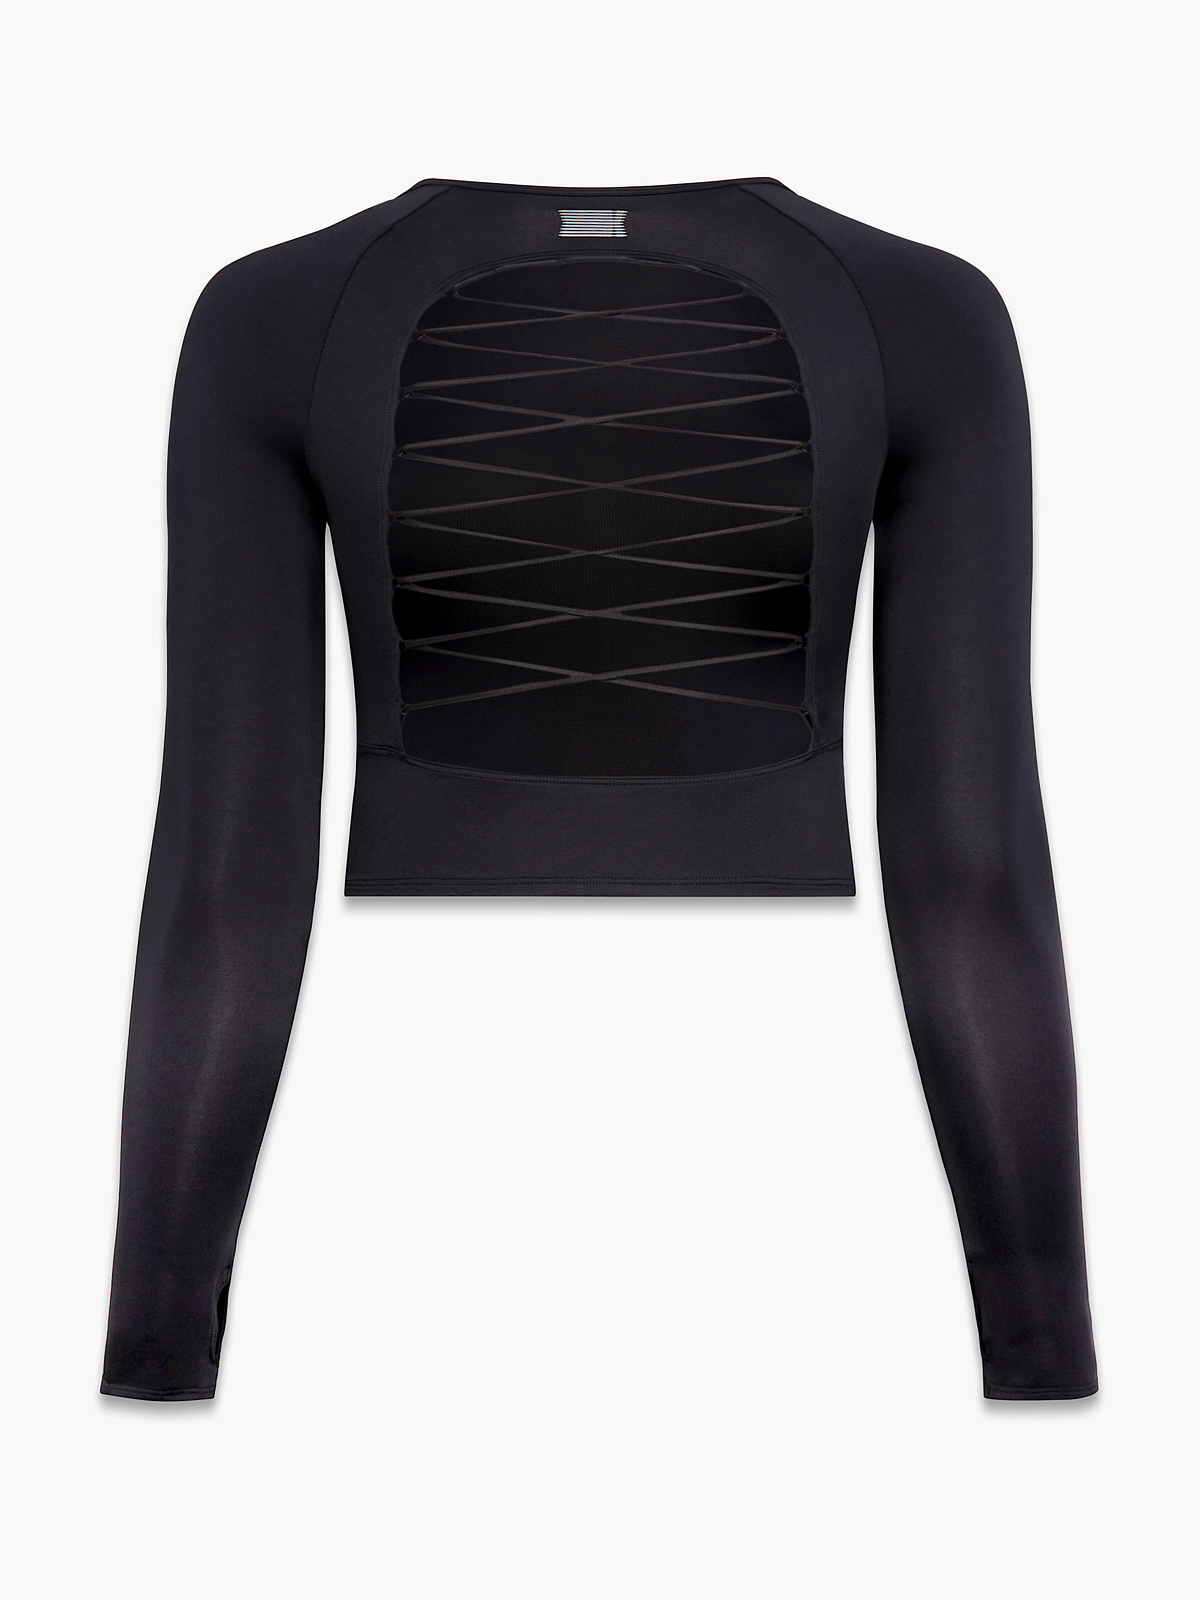 Black Long Sleeve Lace Up Top